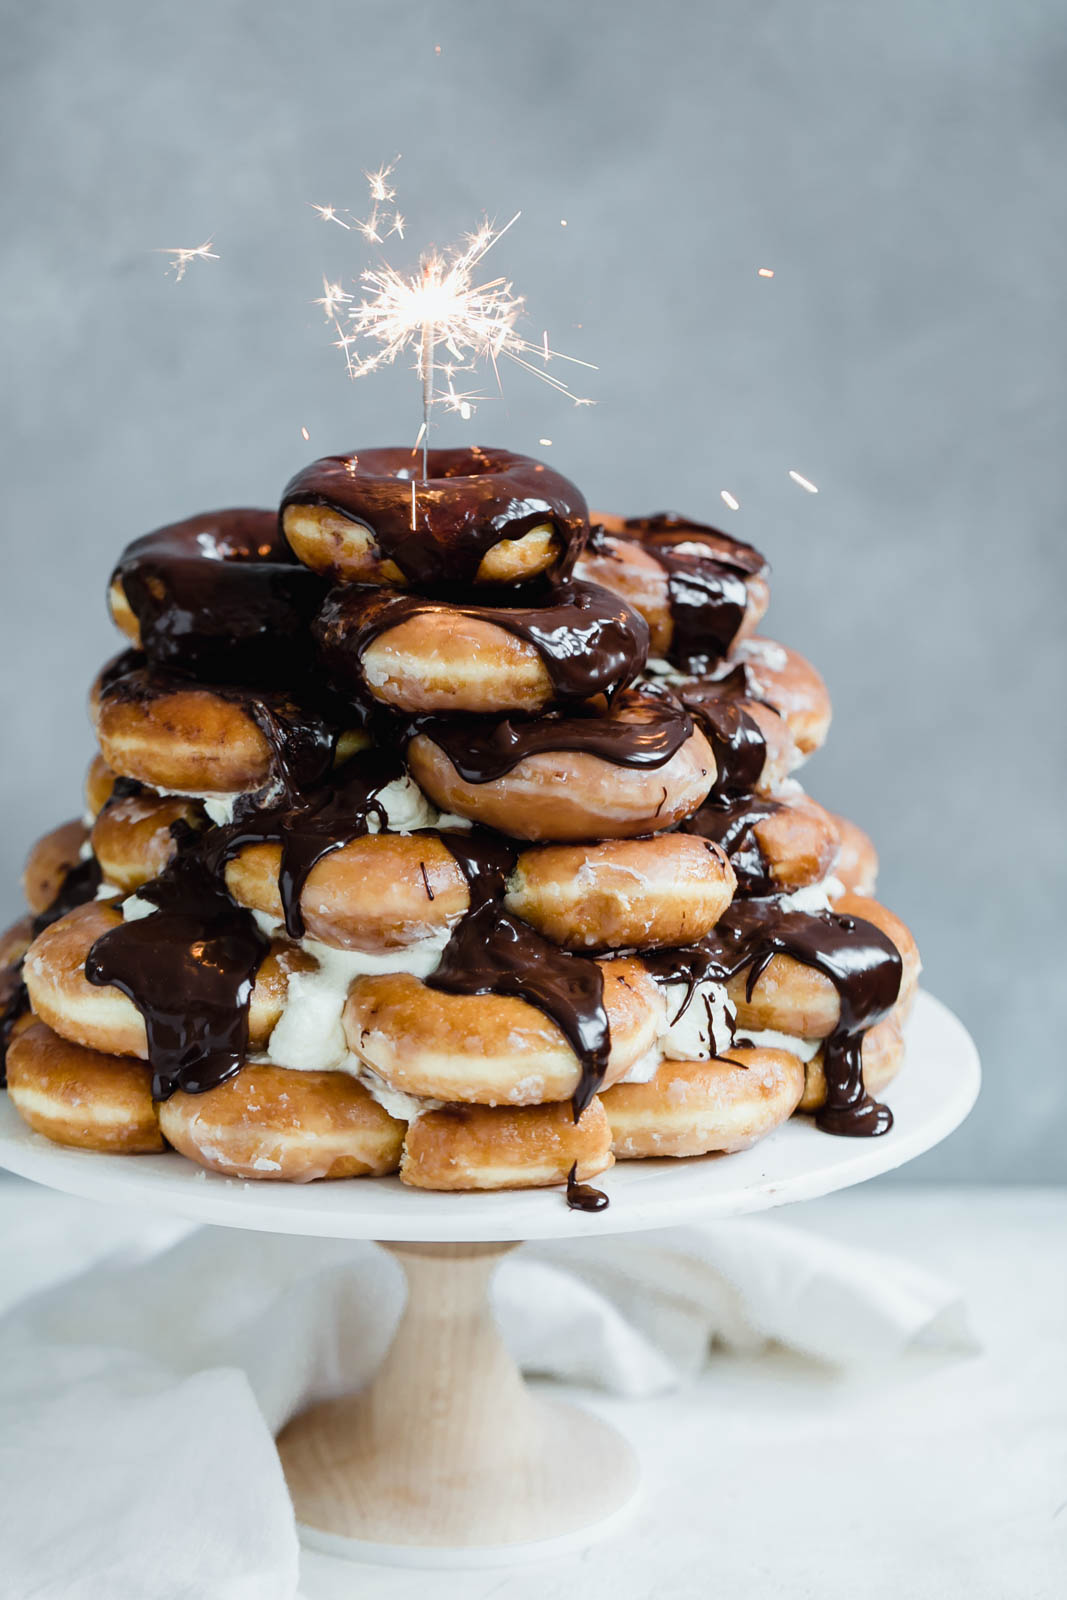 Krispy Kreme Donut Cake: a cake made entirely from Krispy Kreme donuts and mixed with chocolate sauce. I died and went to heaven.